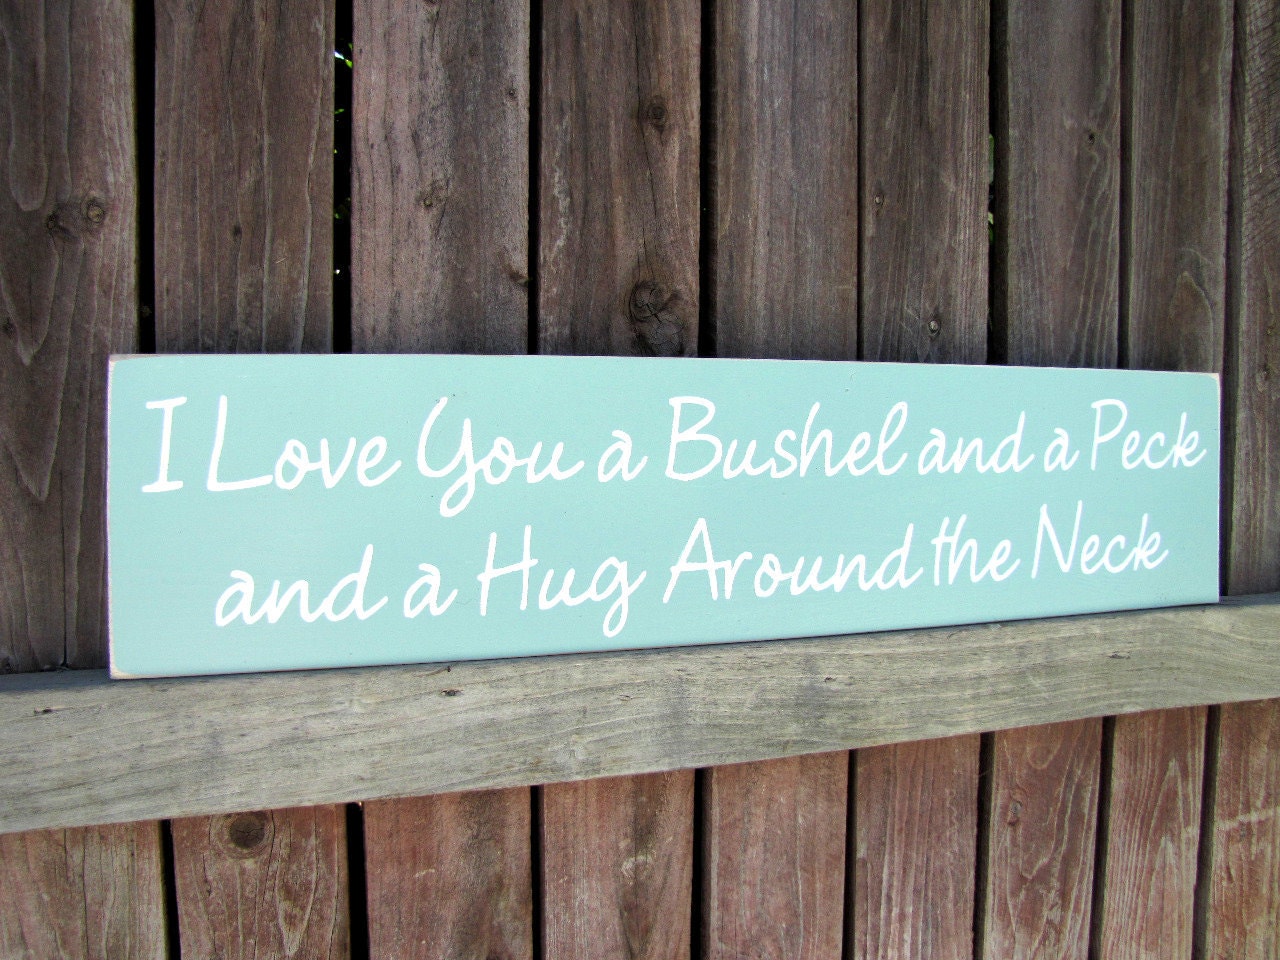 I Love You a Bushel and a Peck and a Hug Around the Neck Wooden Sign Wall Hanging Made to Order - SaltboxHouseSigns